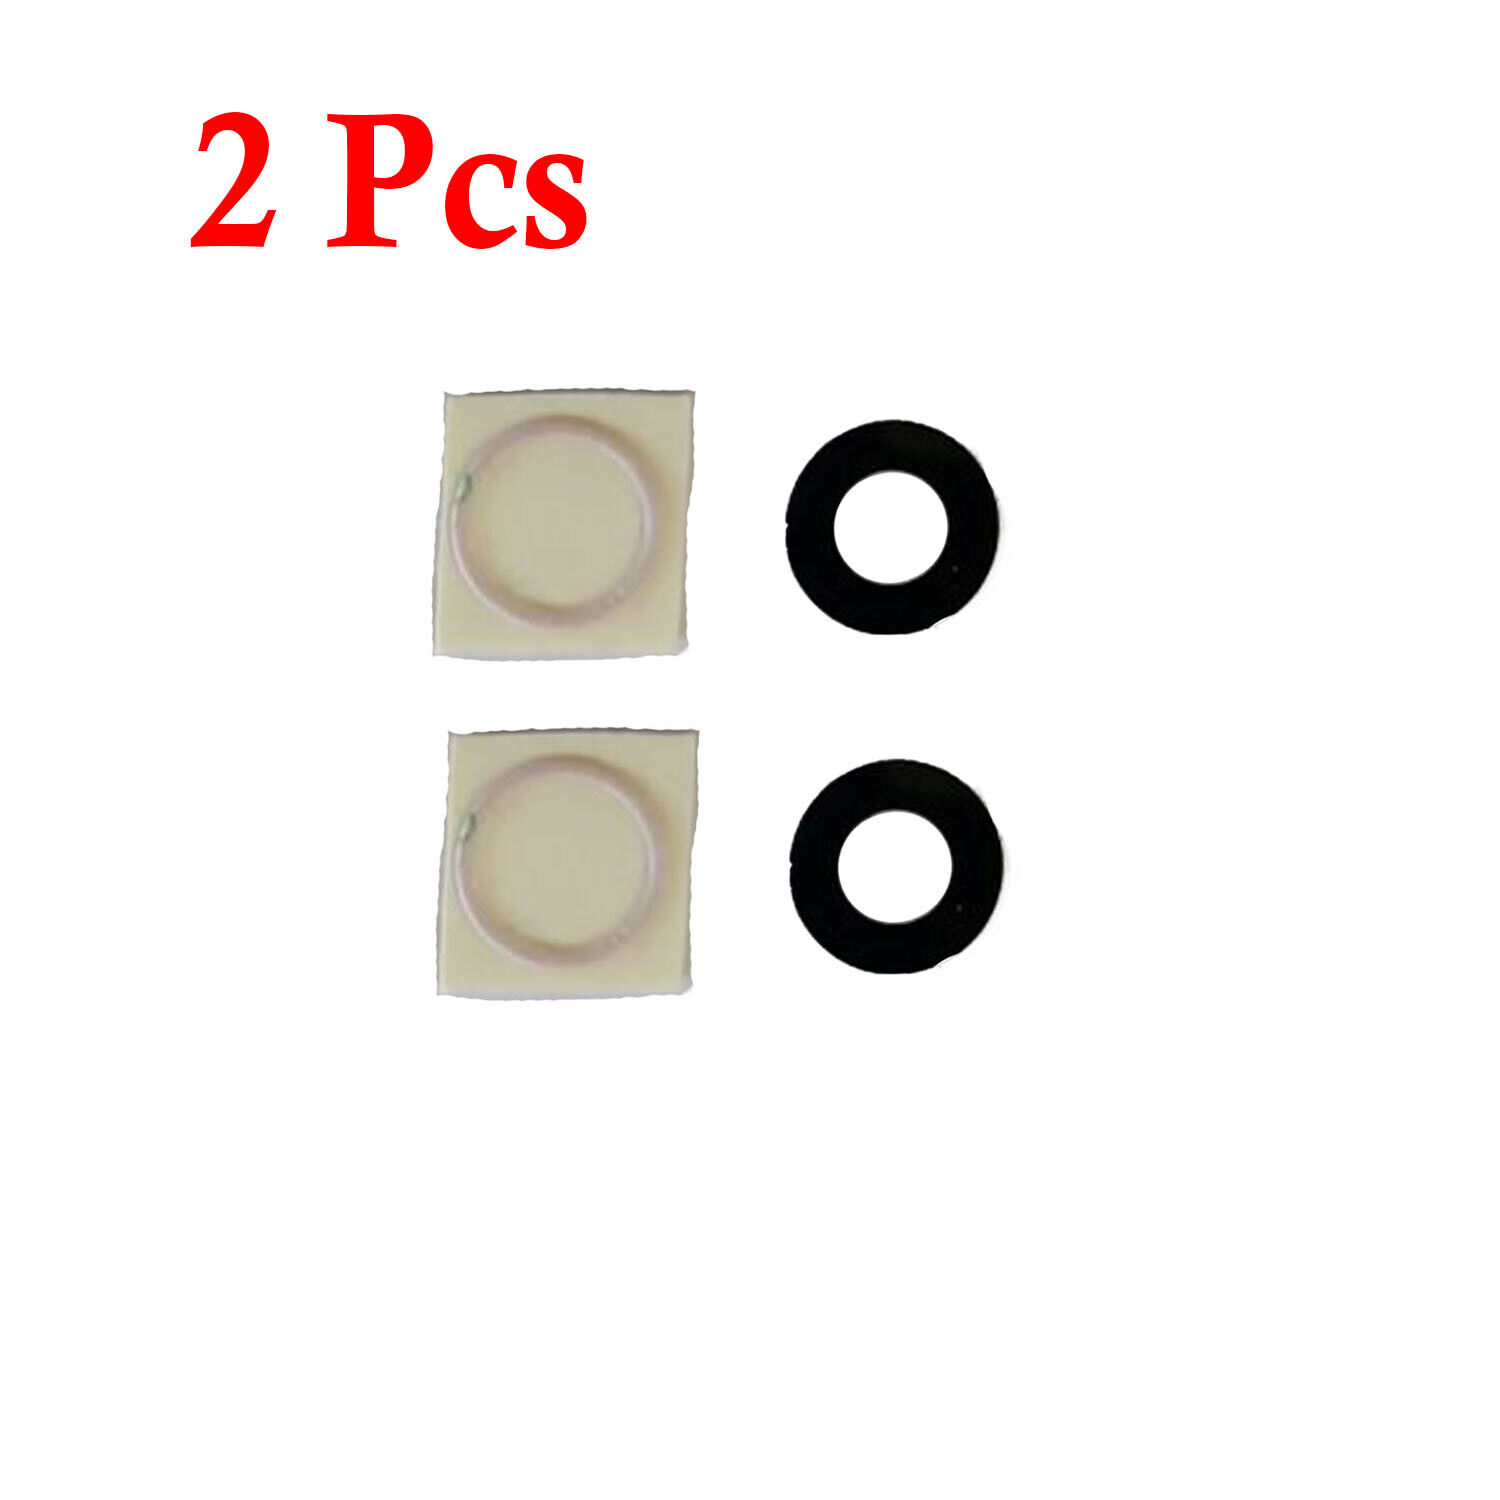 2Pcs Replacement Back Camera Lens Glass for iPhone XR with Adhesive GLASS ONLY Unbranded Does not apply